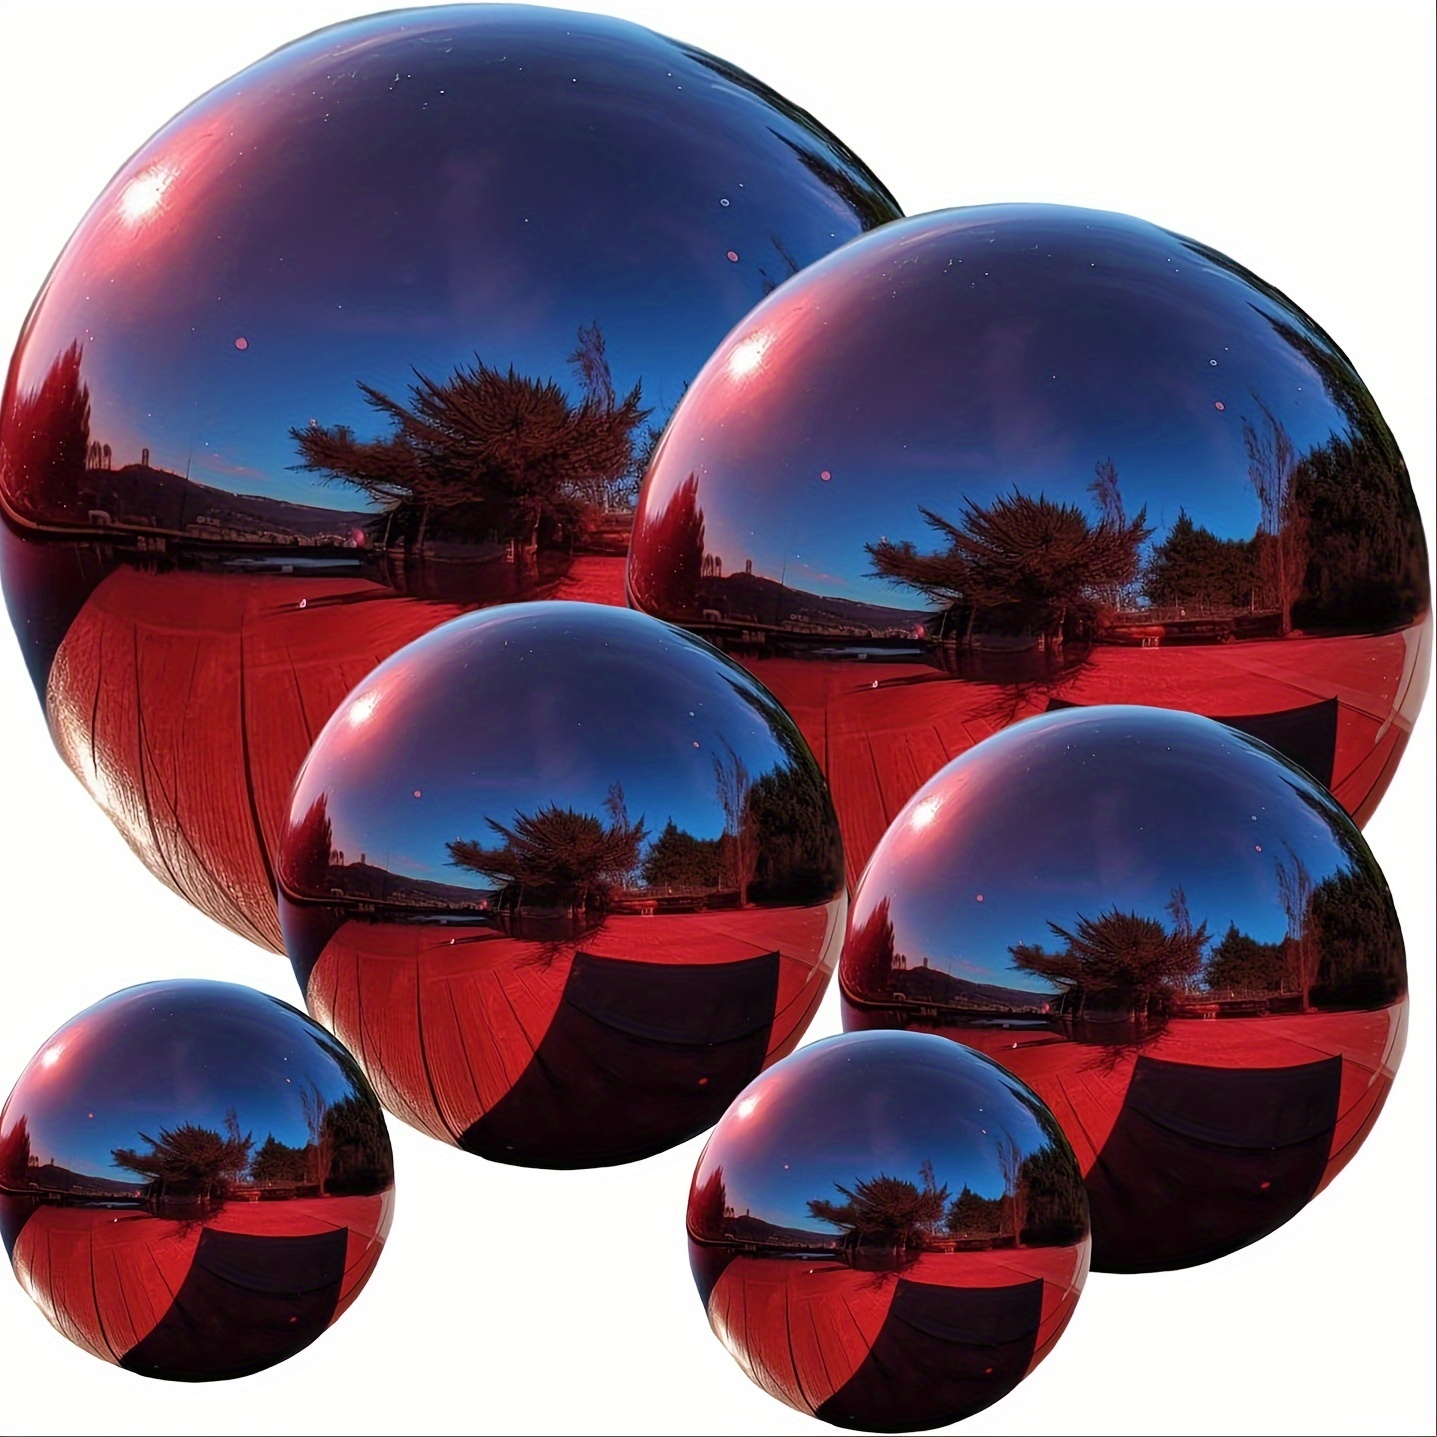 

6pcs, Stainless Steel Gazing Ball, Red Mirror Polished Hollow Ball Reflective Garden Ball, Pre-drilled Gazing Globe For Home Garden Ornament Decorations